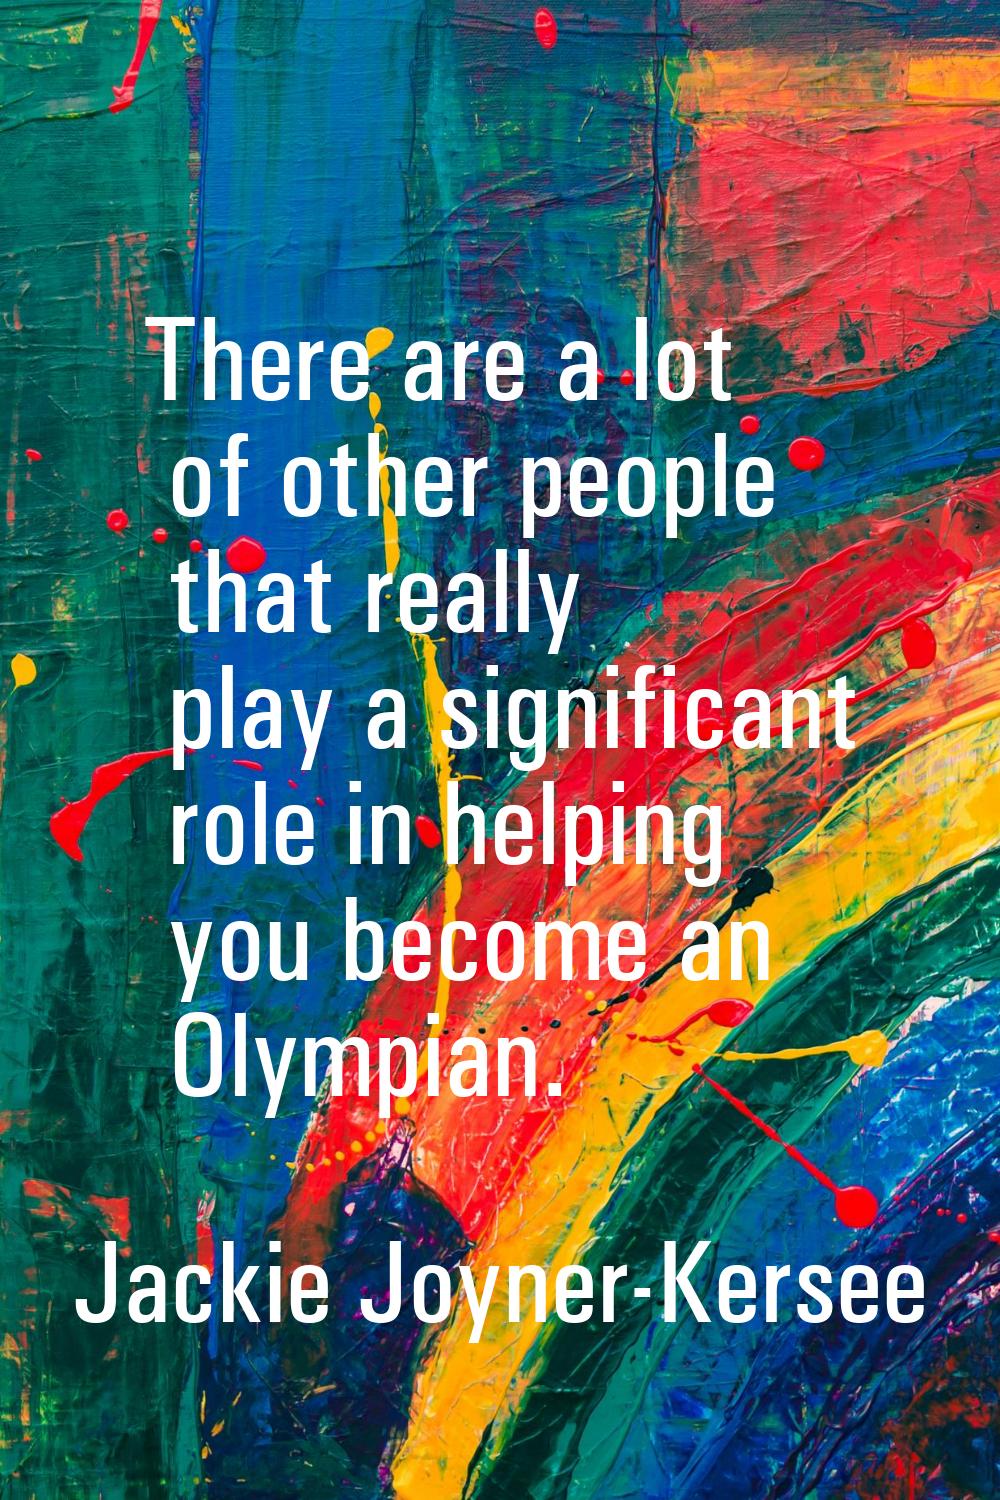 There are a lot of other people that really play a significant role in helping you become an Olympi